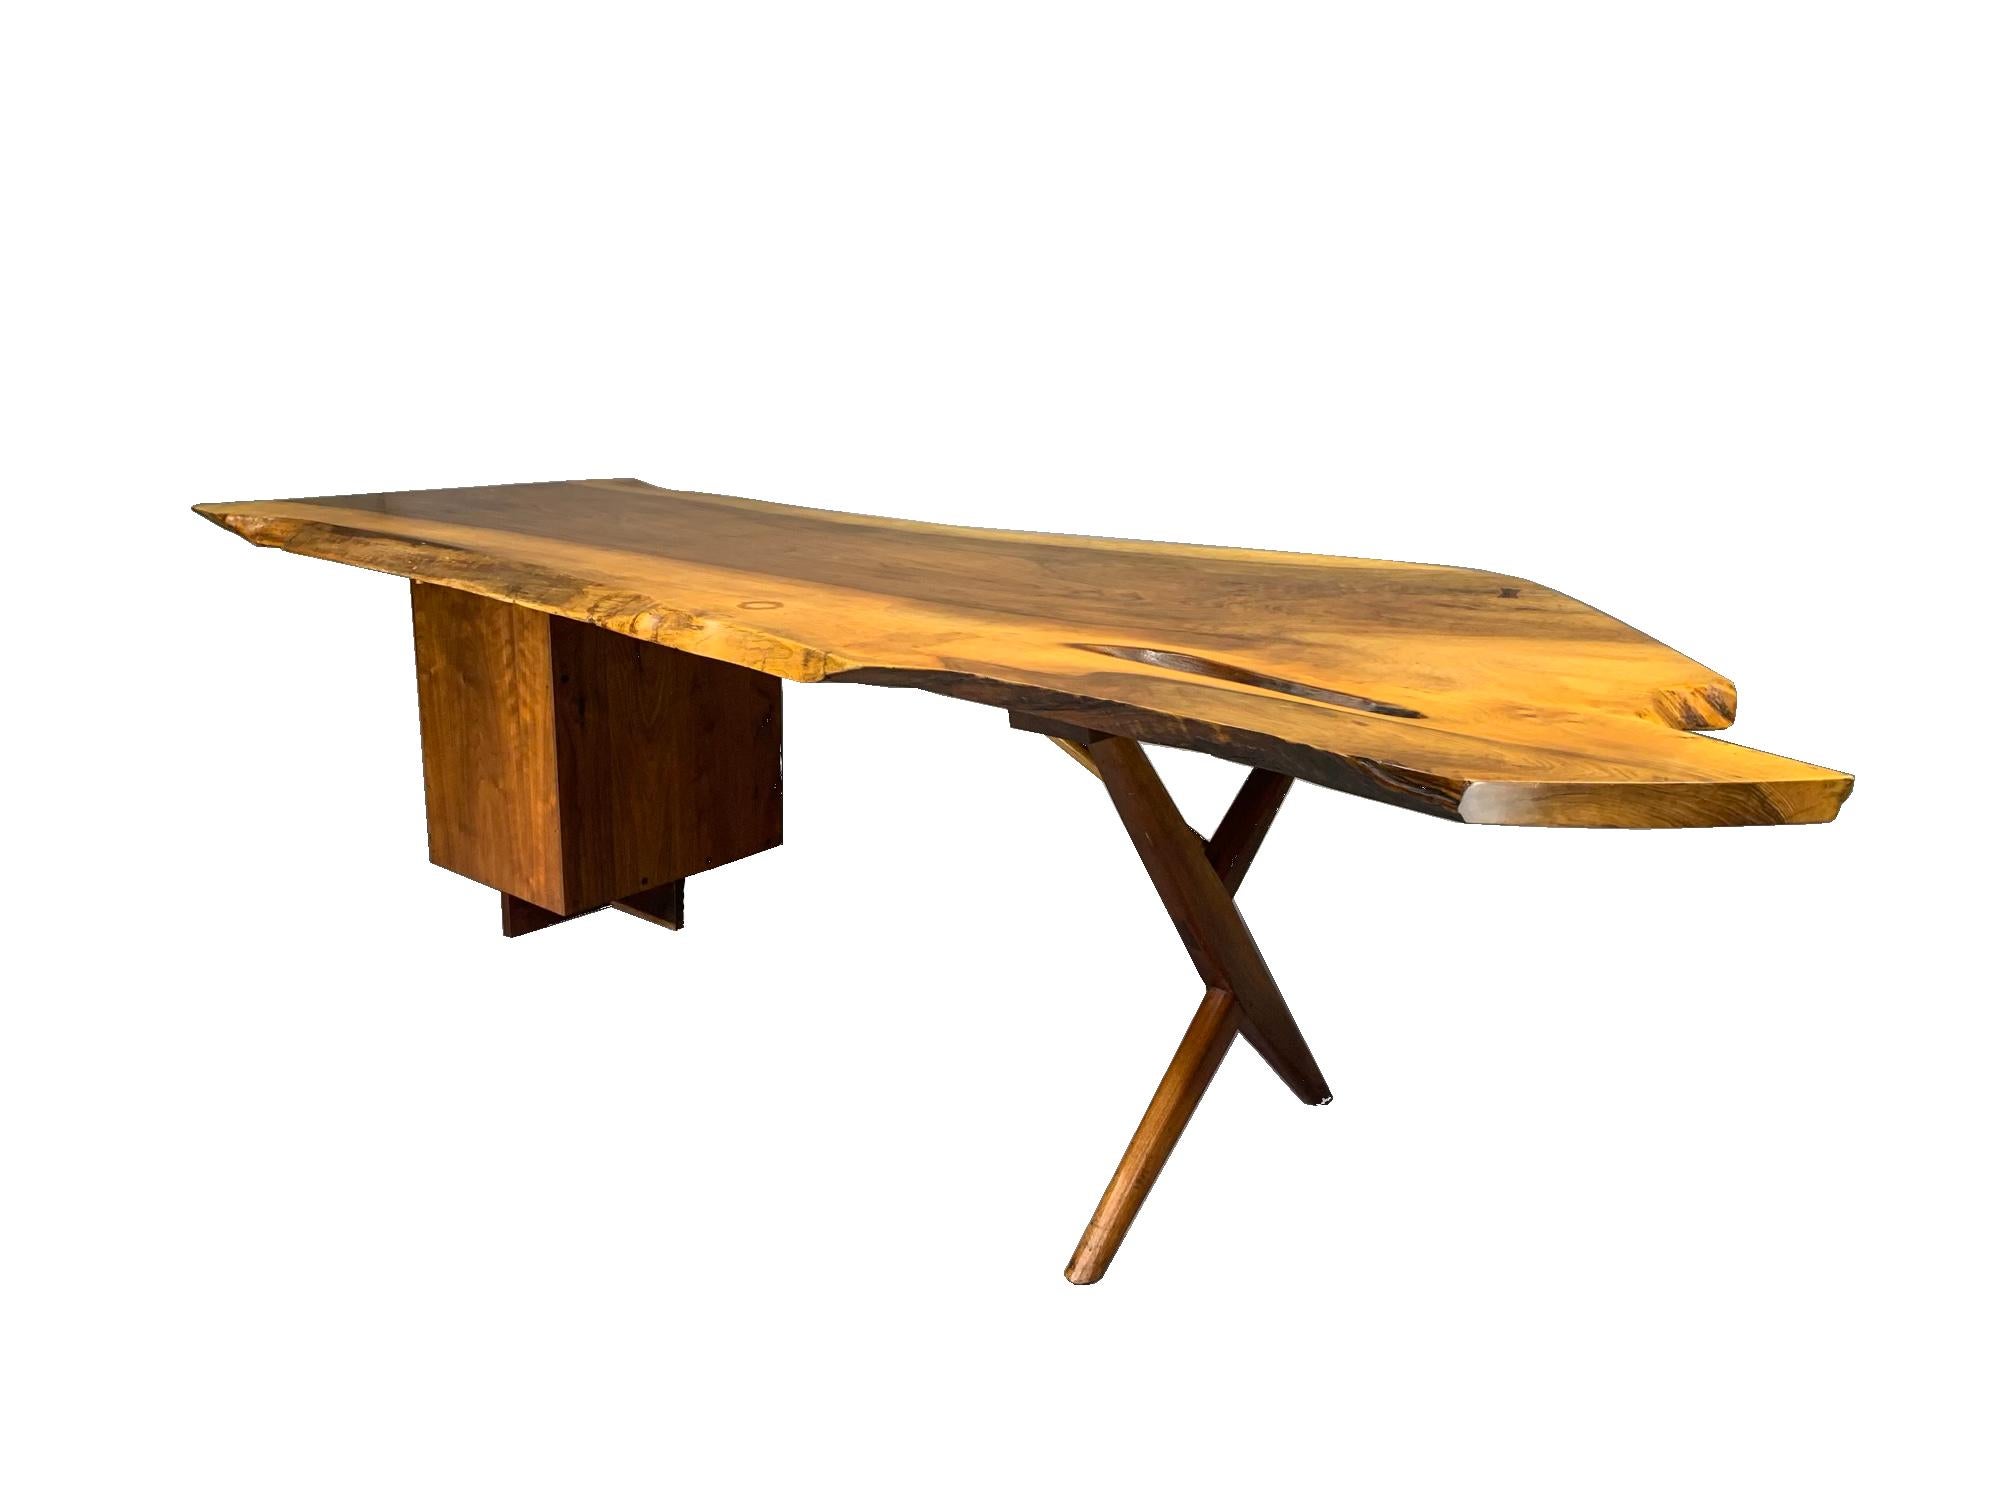 Large writing desk circa late 1950s-early 1960s, made by George Nakashima (1905-1990), New Hope, Pennsylvania, American black walnut, “Conoid” style, with long plank top with polished surface, butterfly joint and finished natural well; freeform